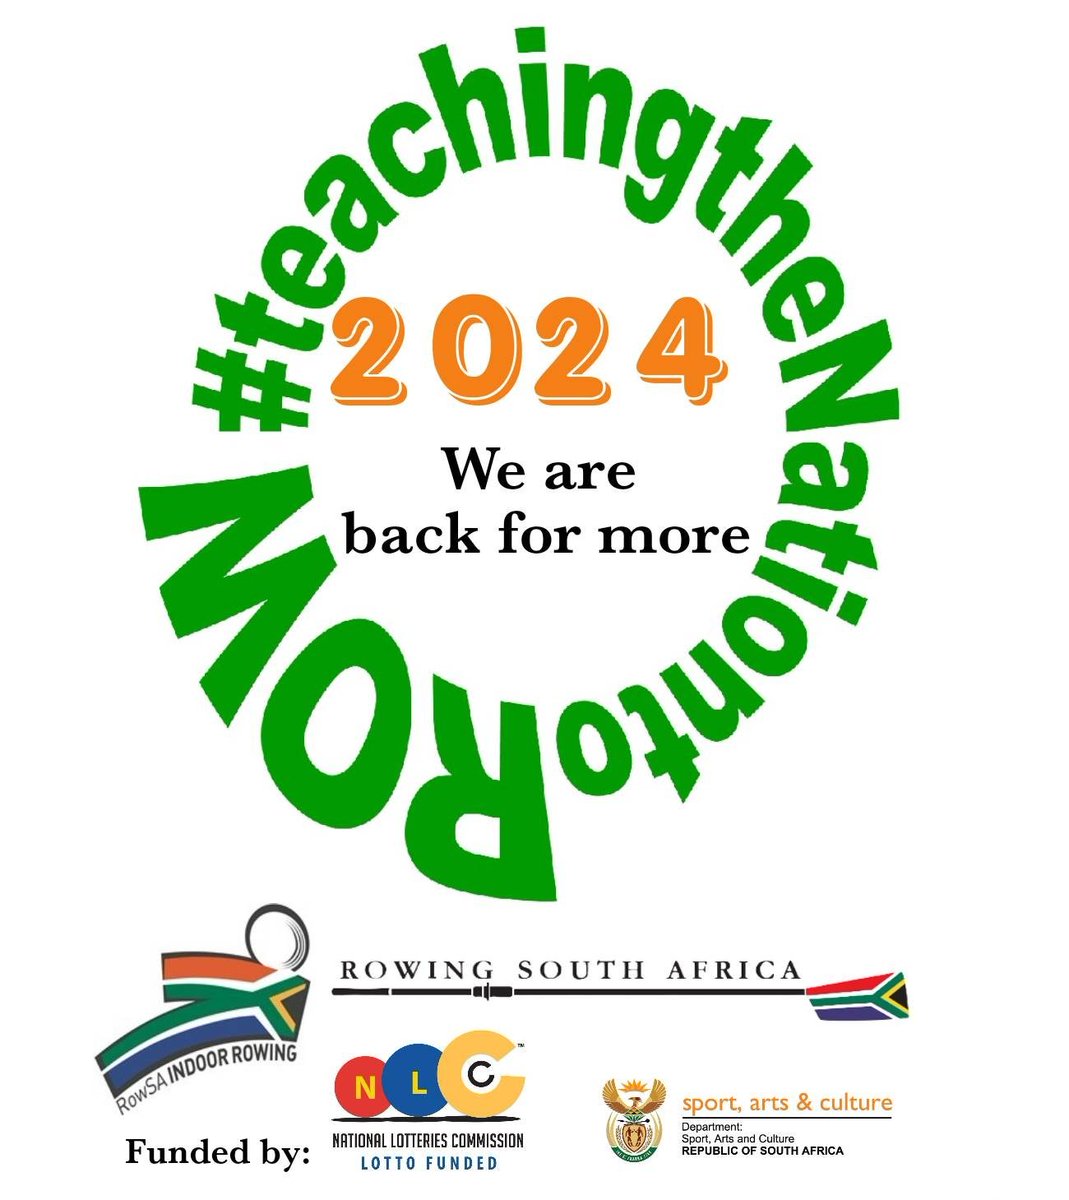 TeachingtheNationtoROW 2024 we are back for more. An impactful experience and lives being changed through sports. @RowingRSA @SA_NLC @SPORTandREC_RSA @WorldRowing